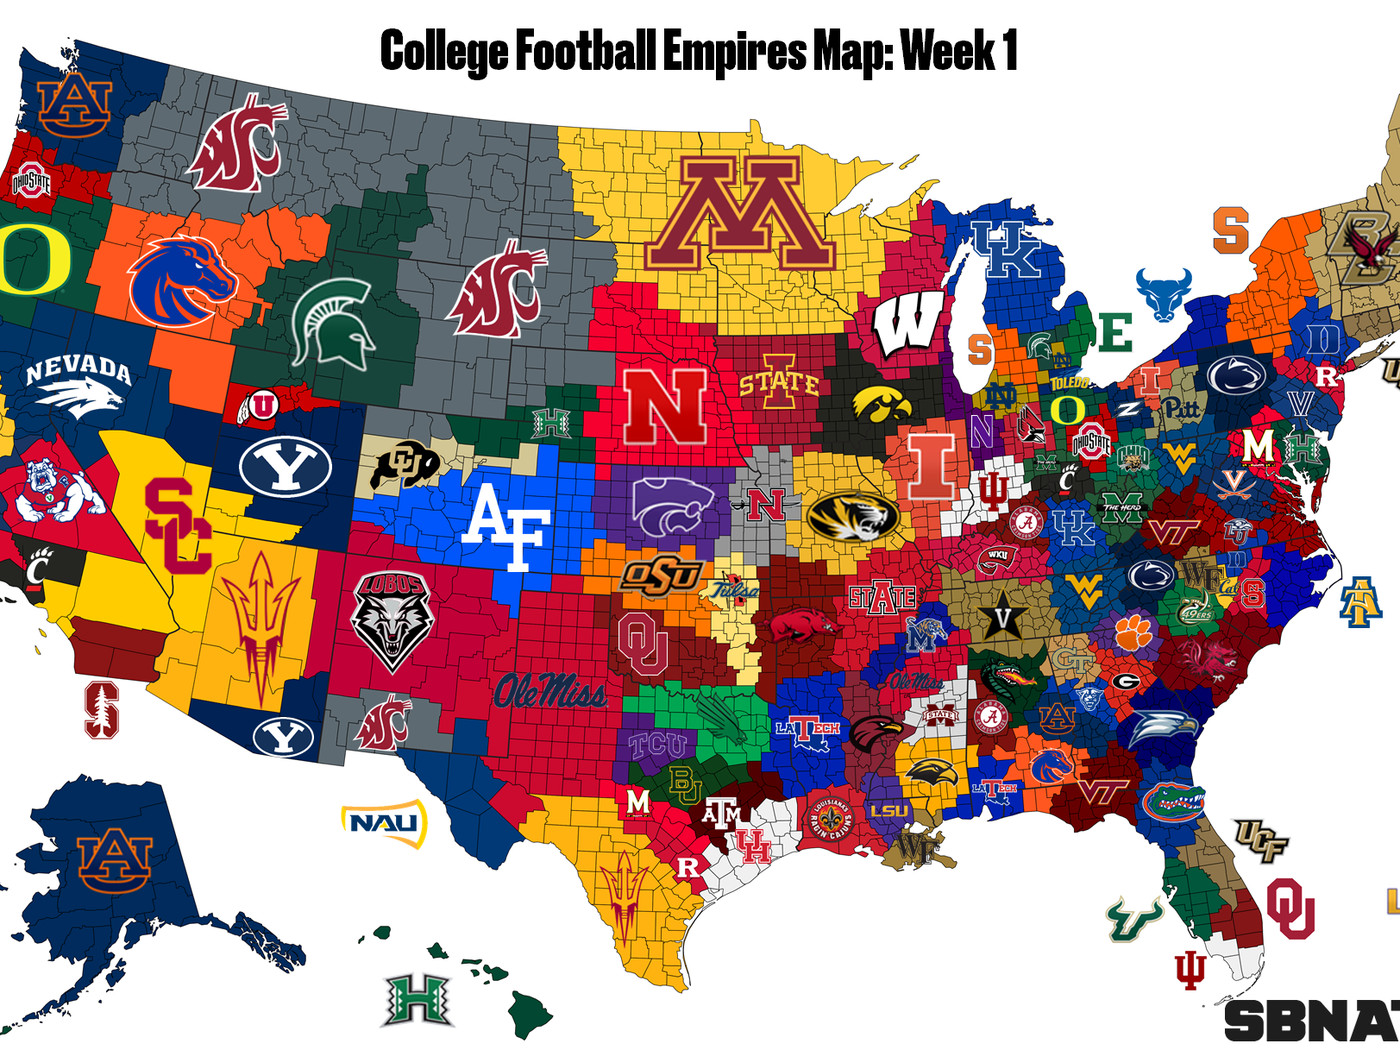 College Football Empires Map, Week 1